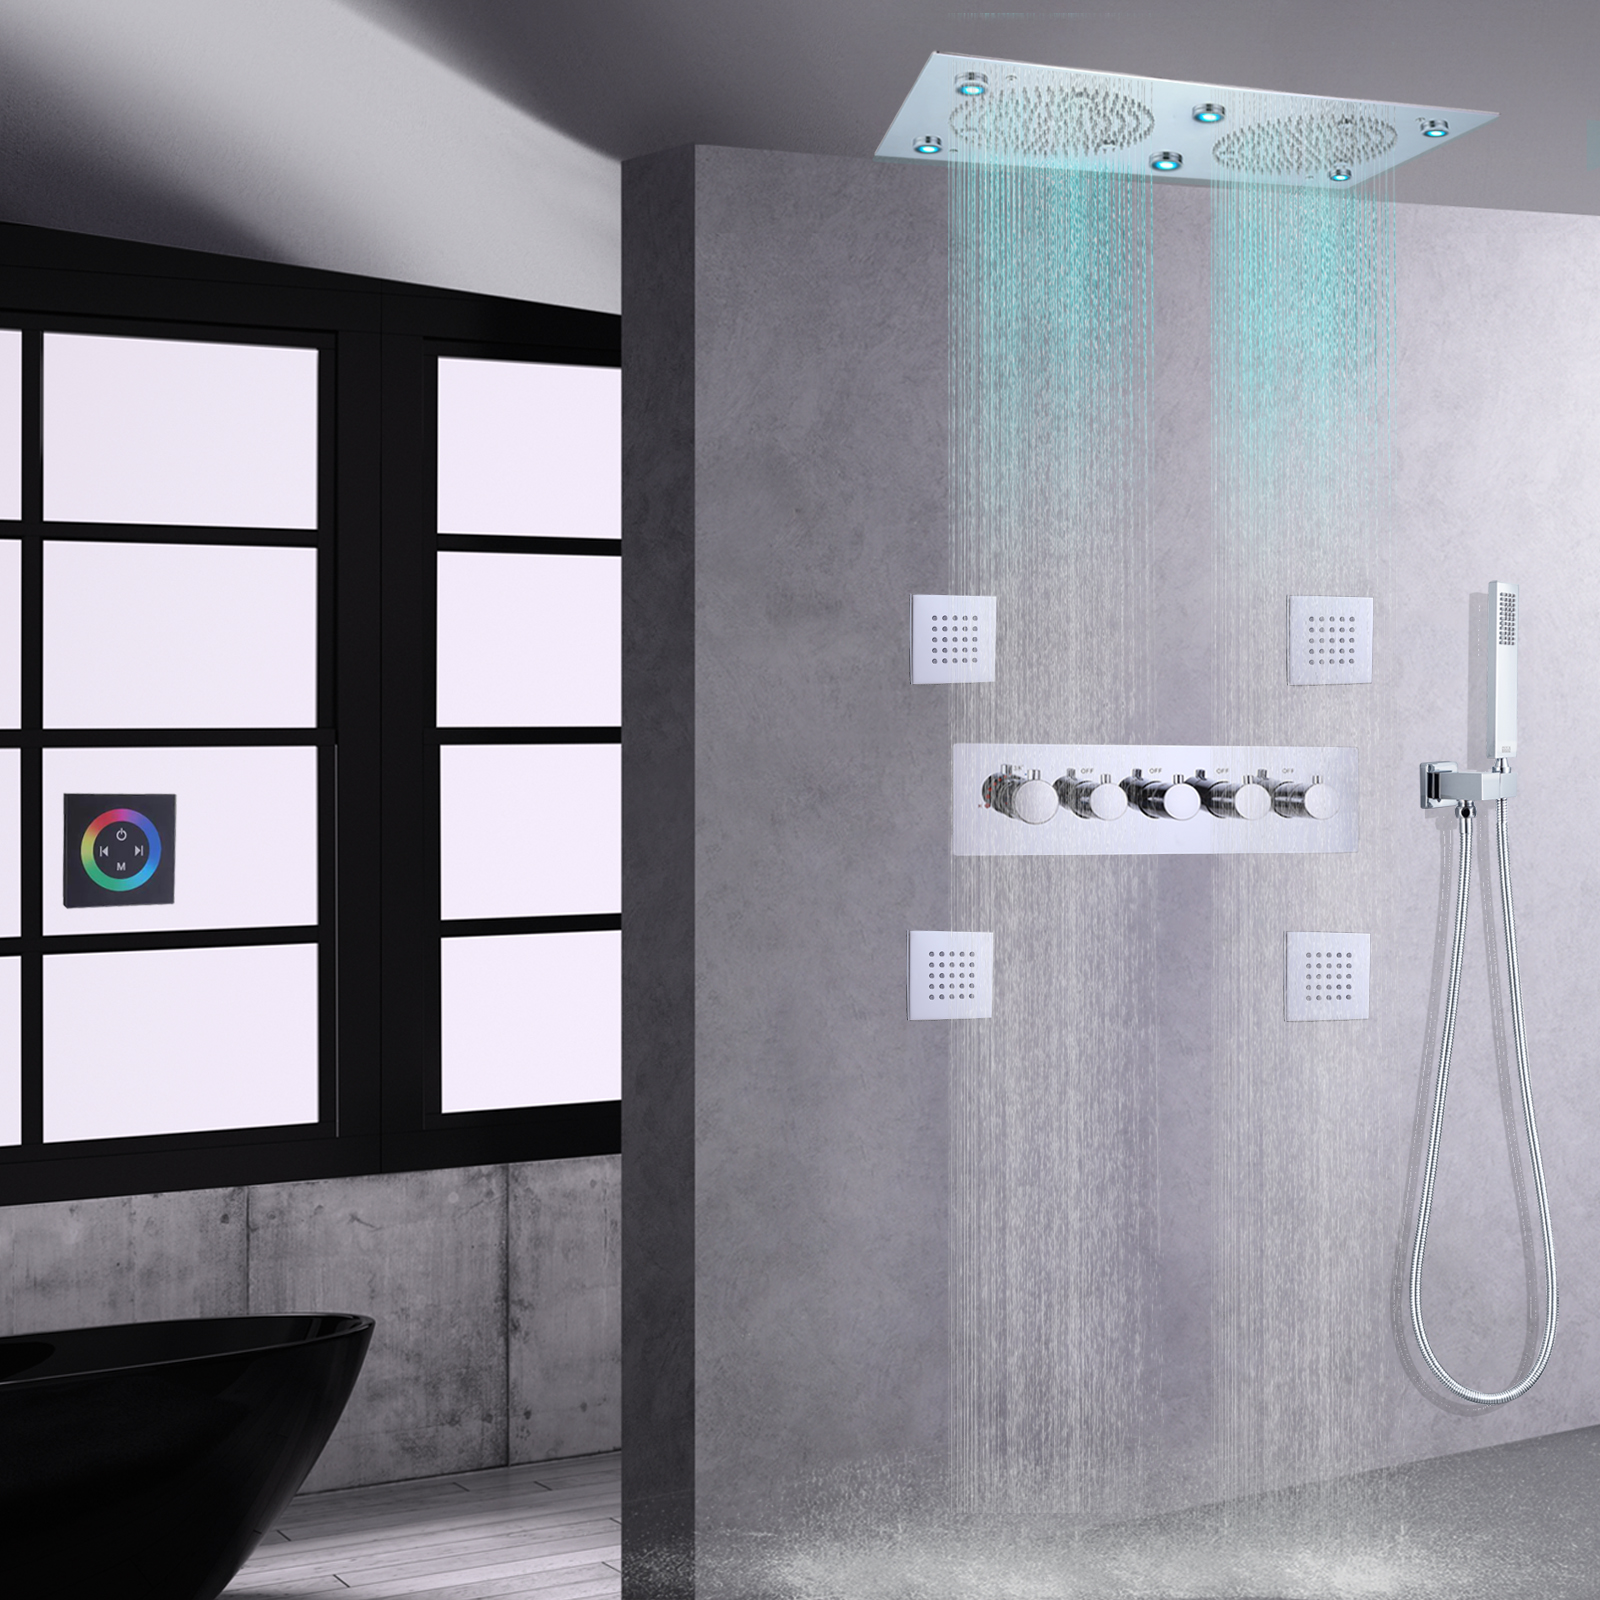 Chrome Polished Shower Faucet Bathroom LED Thermostatic Wall-mounted Rain Mist With Handheld Shower Arm